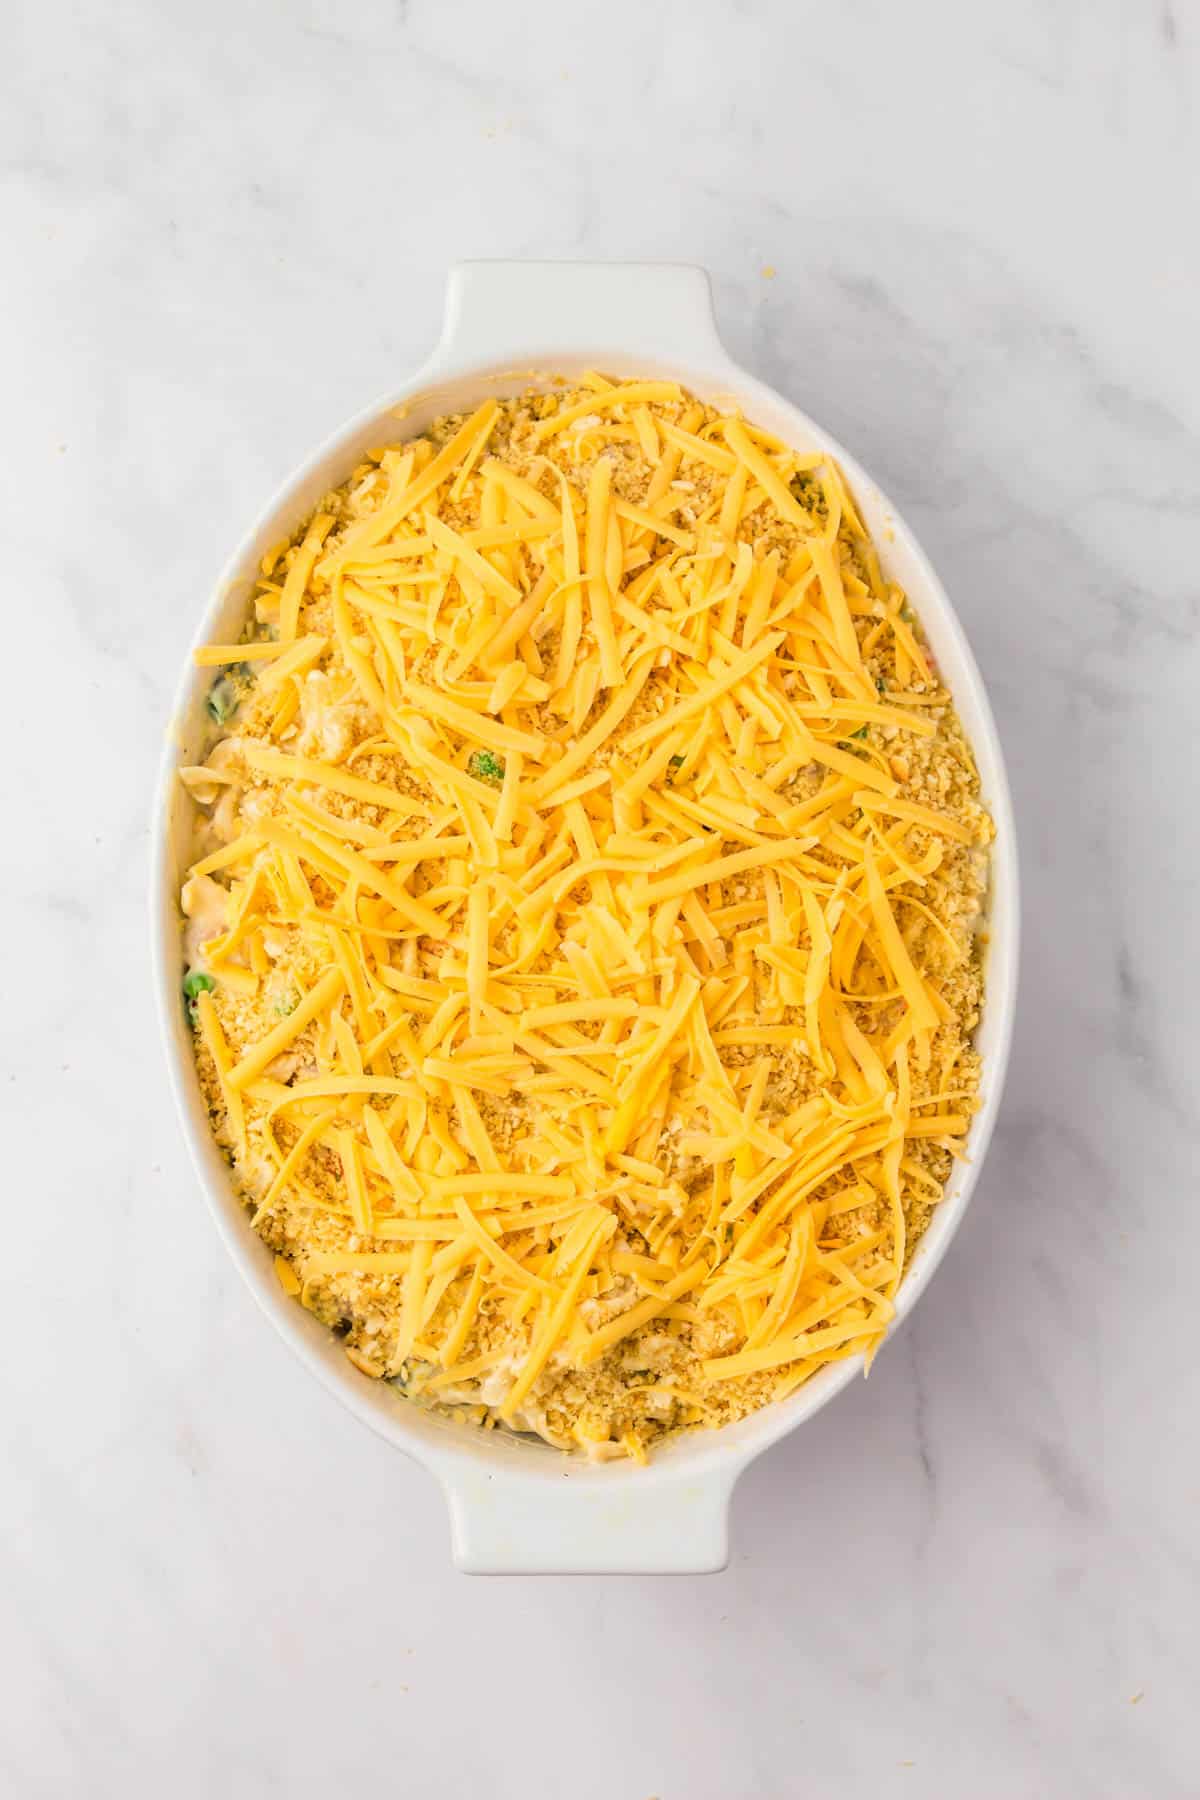 Sprinkling cheese over breadcrumbs in a baking dish.